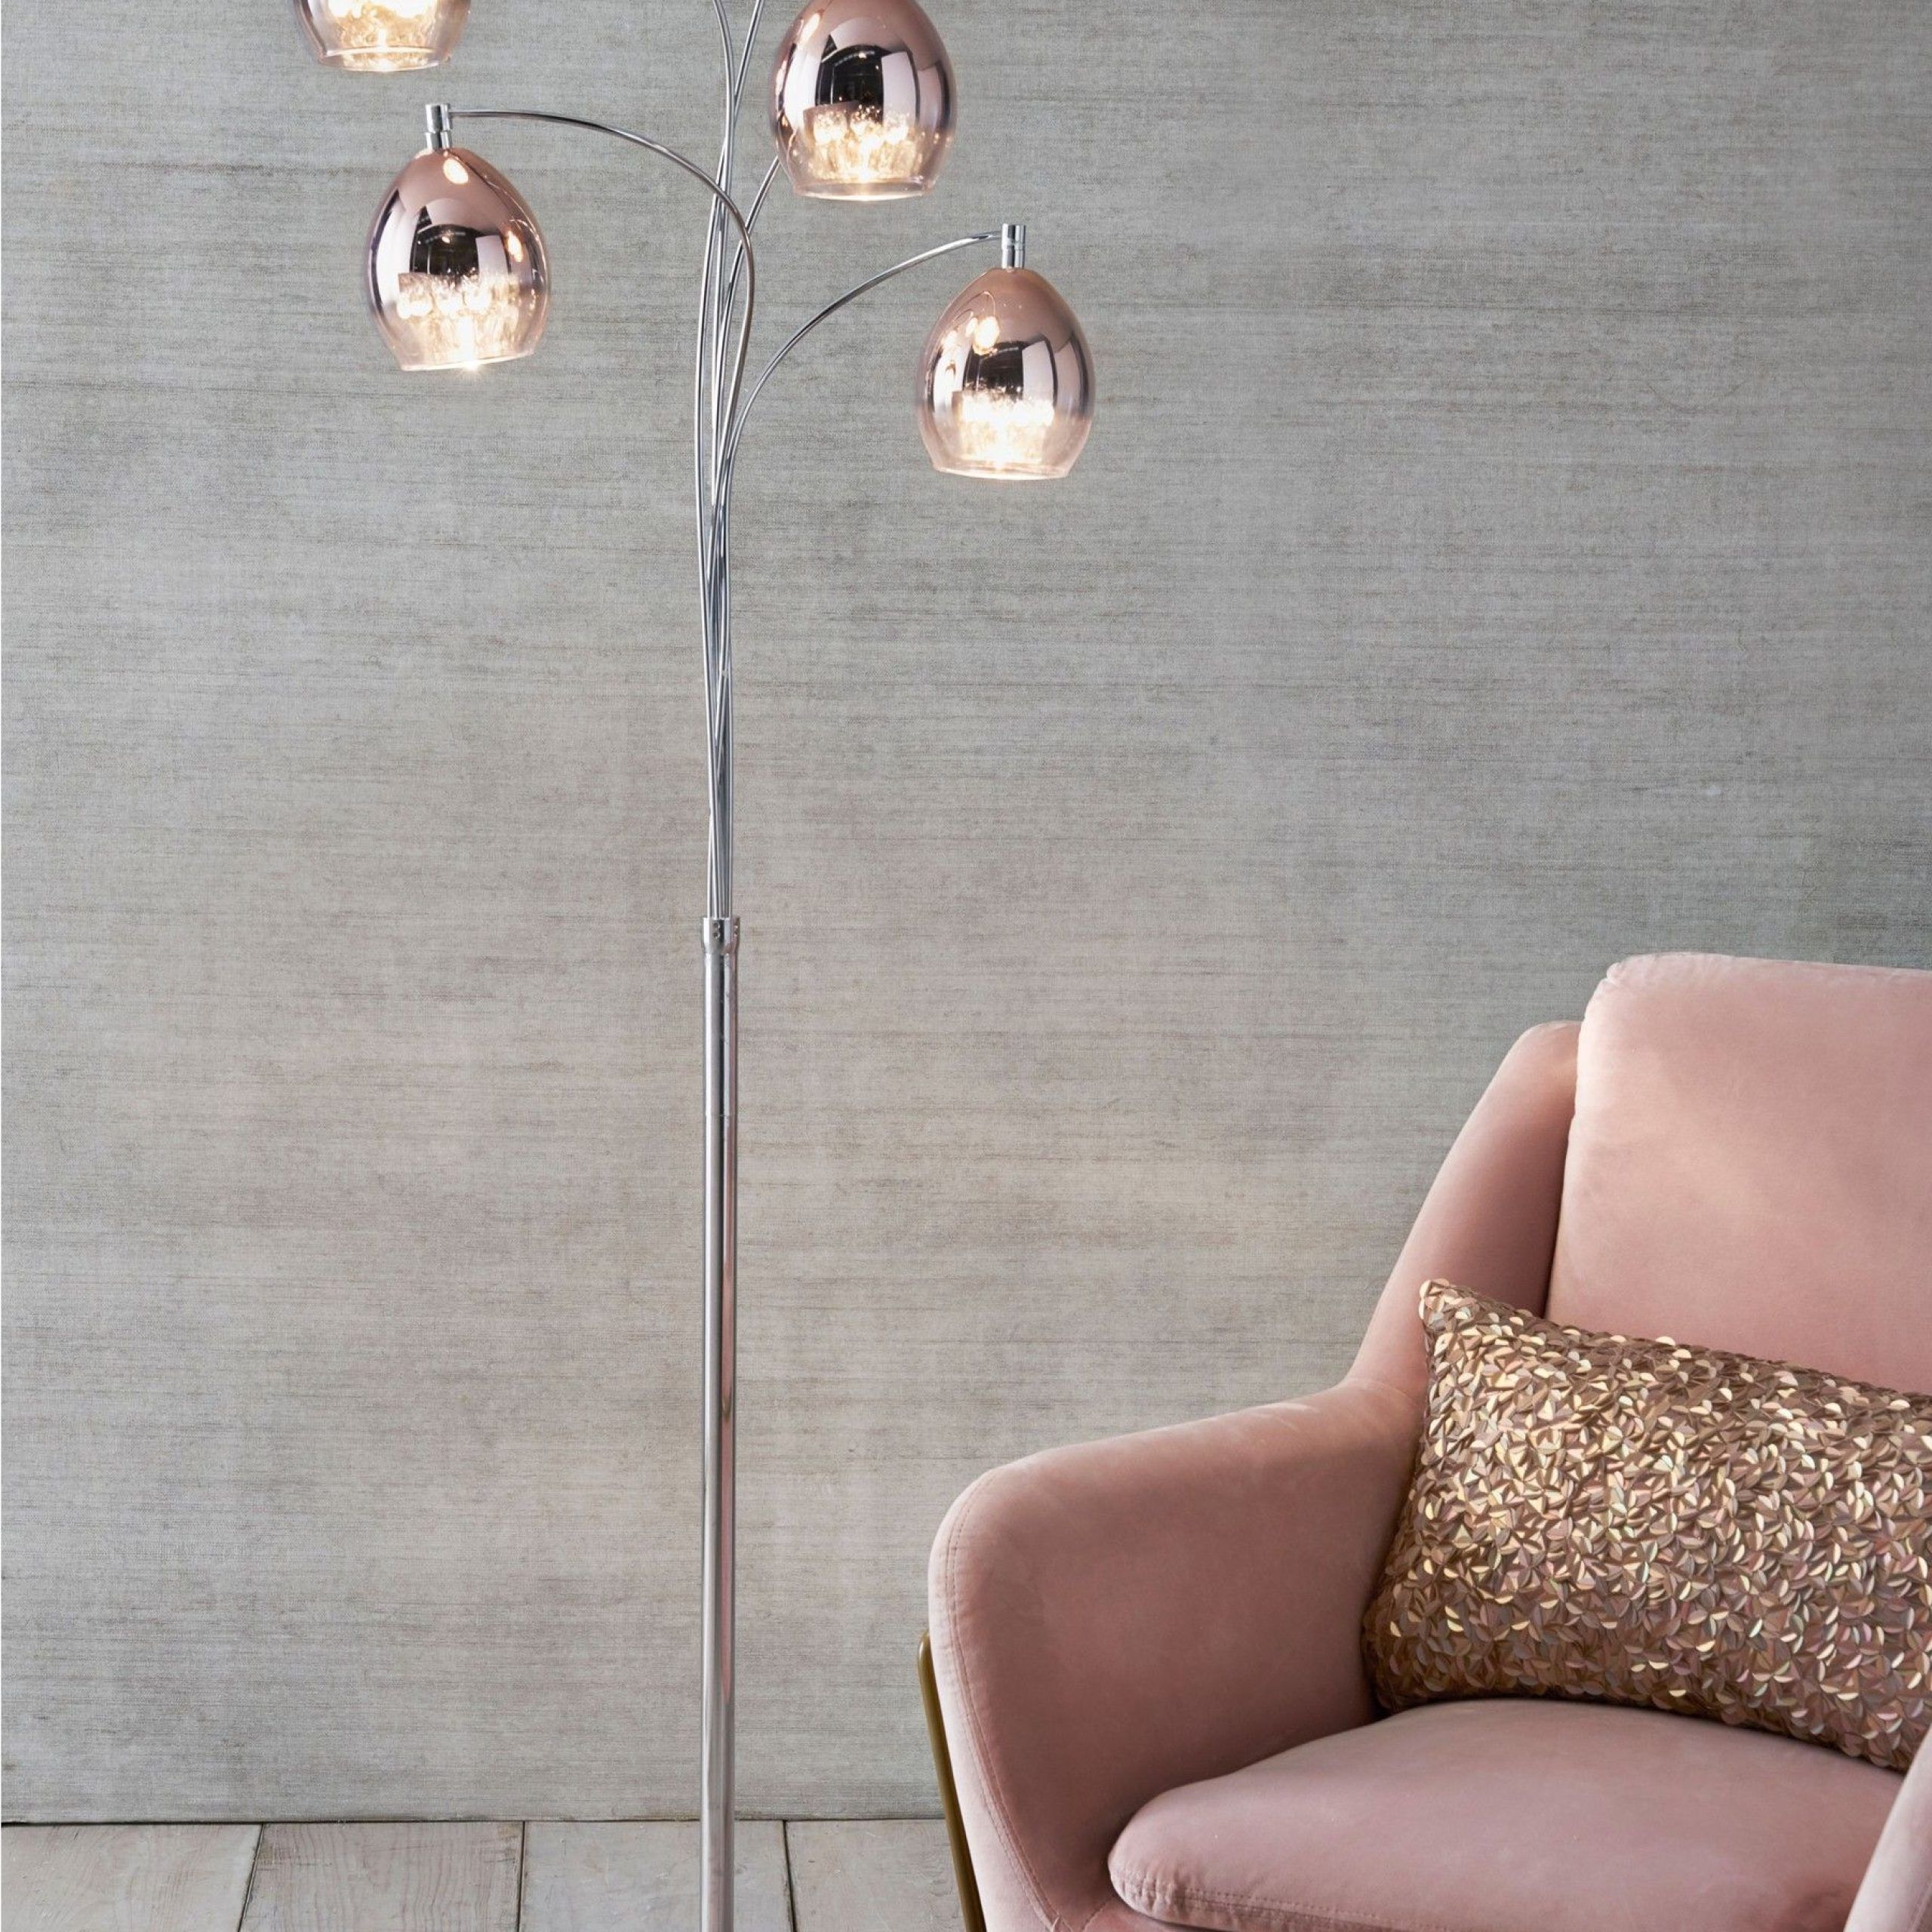 Most Recent 5 Light Standing Lamps Intended For Next Bella 5 Light Floor Lamp – Pink (View 14 of 15)